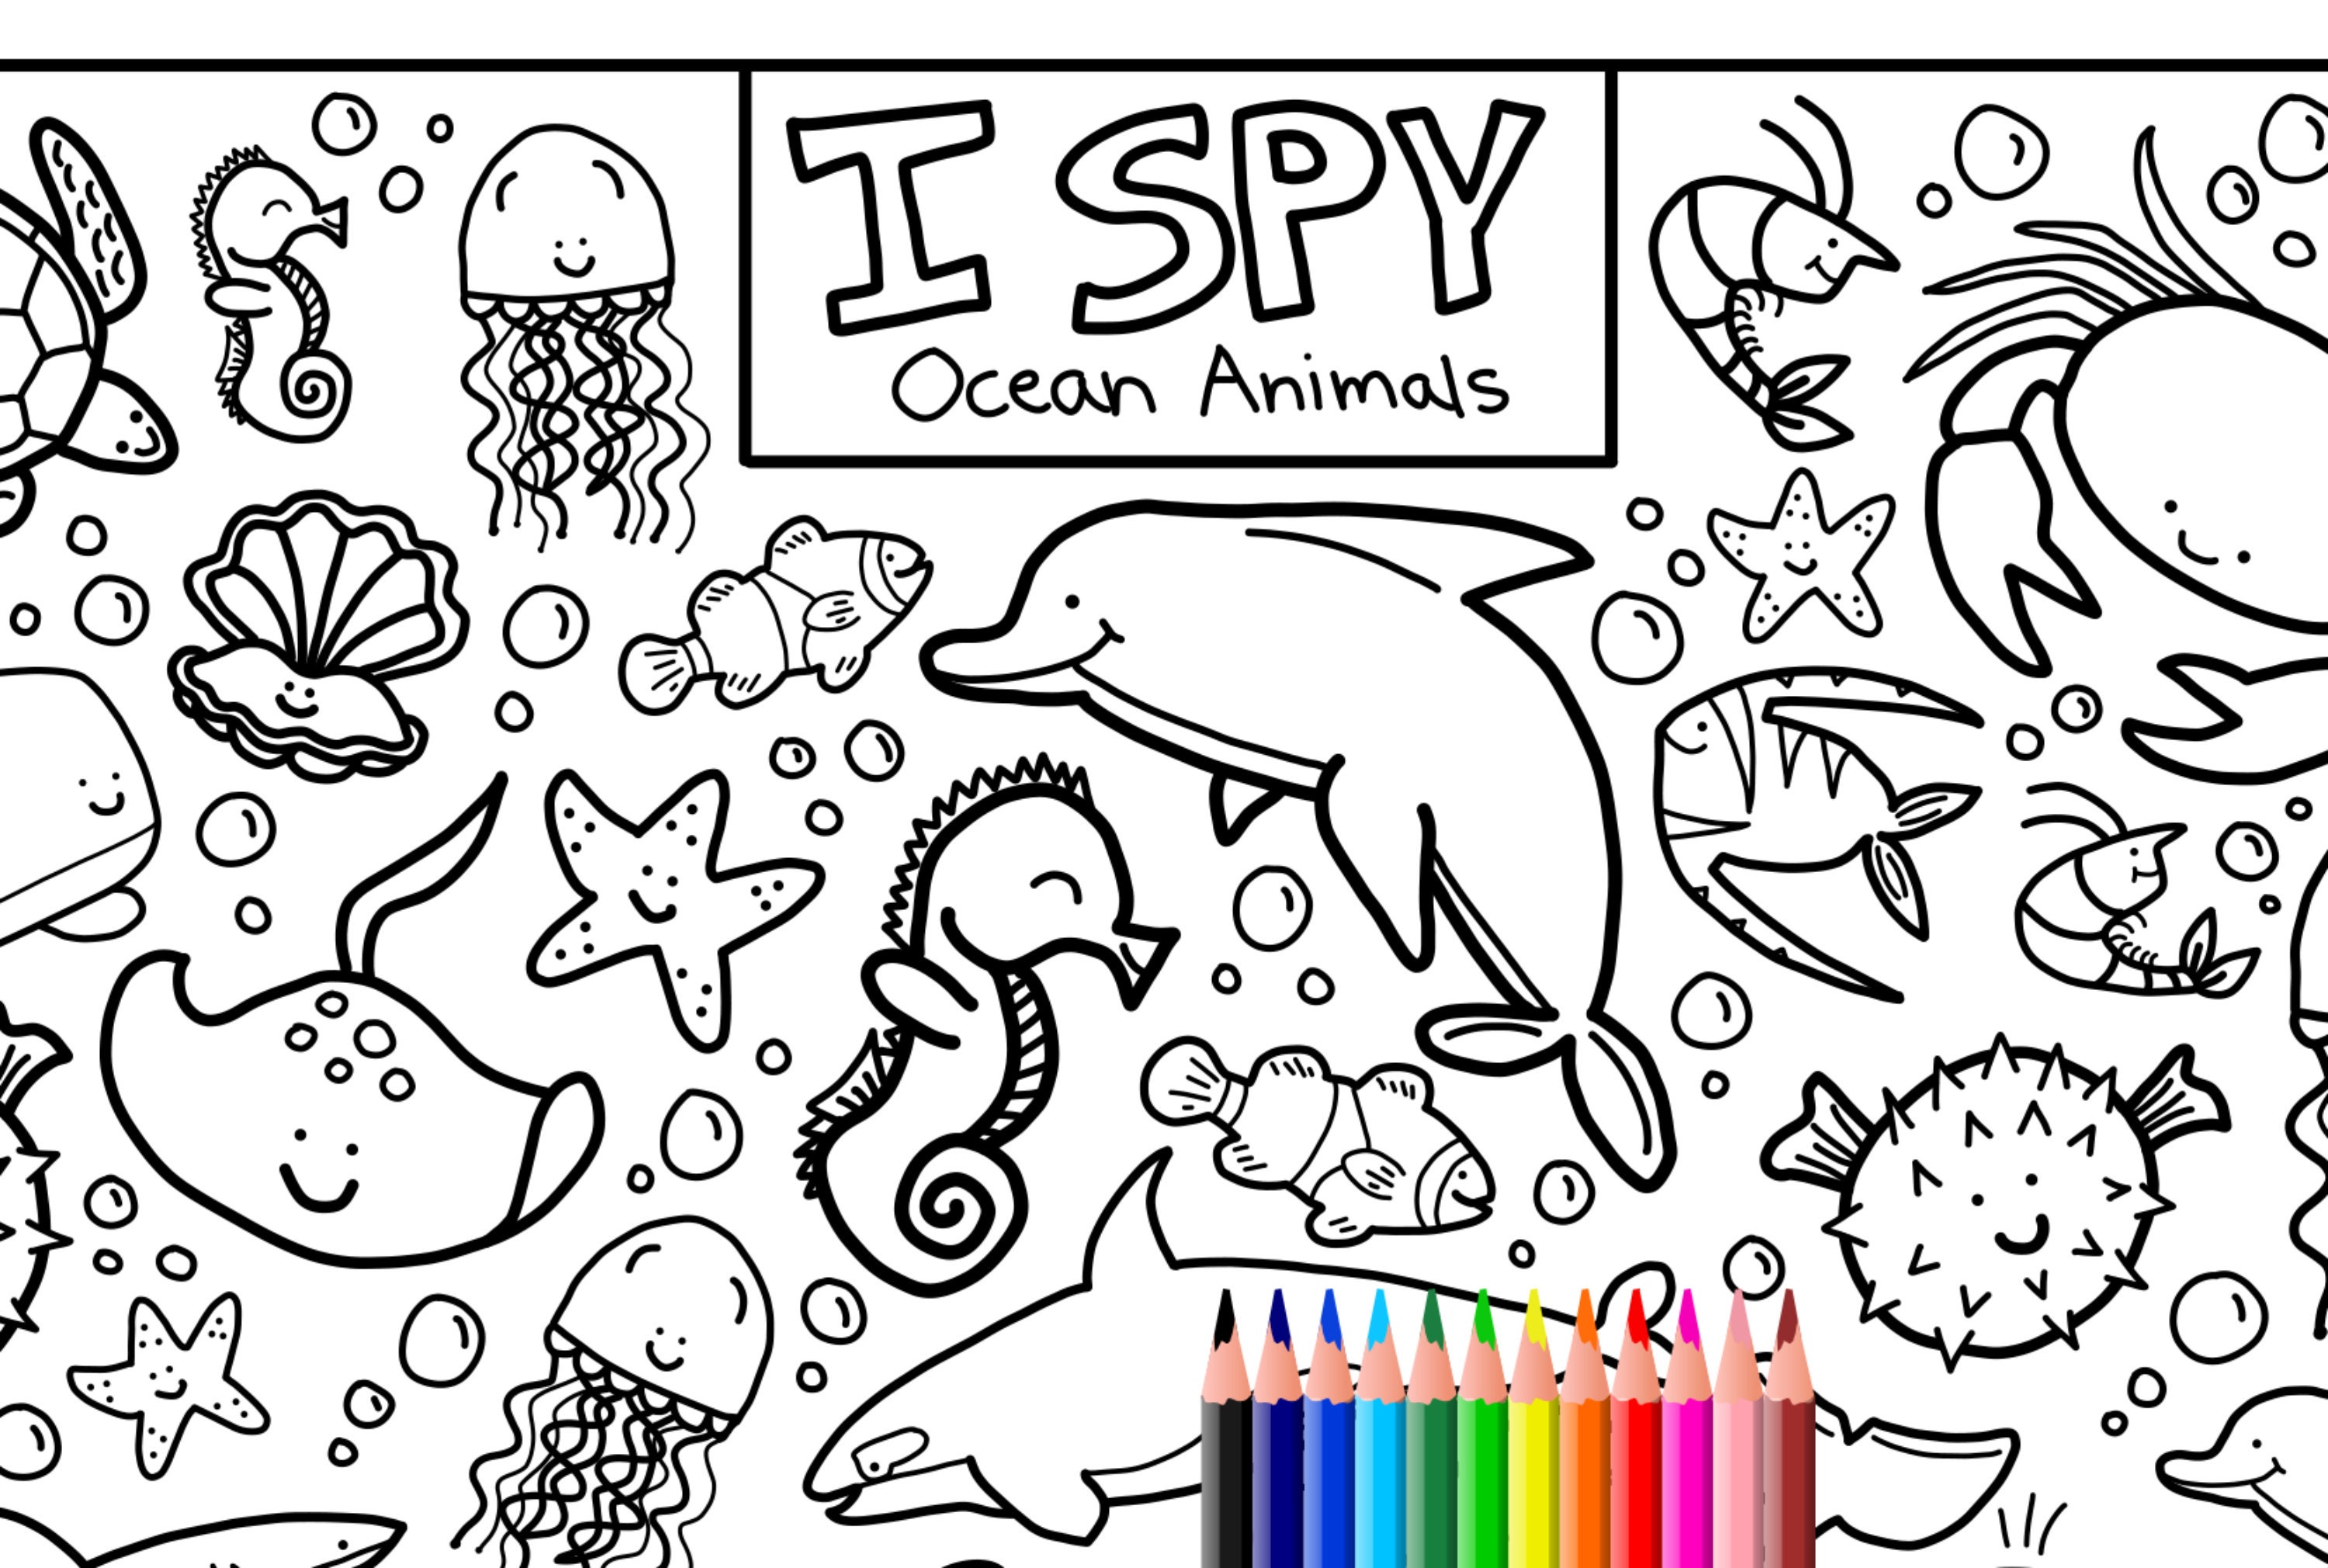 I Spy Ocean Animals Coloring Page, Printable Download, Colouring Page, Kids  Search Activity Printout, Cute Cartoons, Sea Creature Doodles